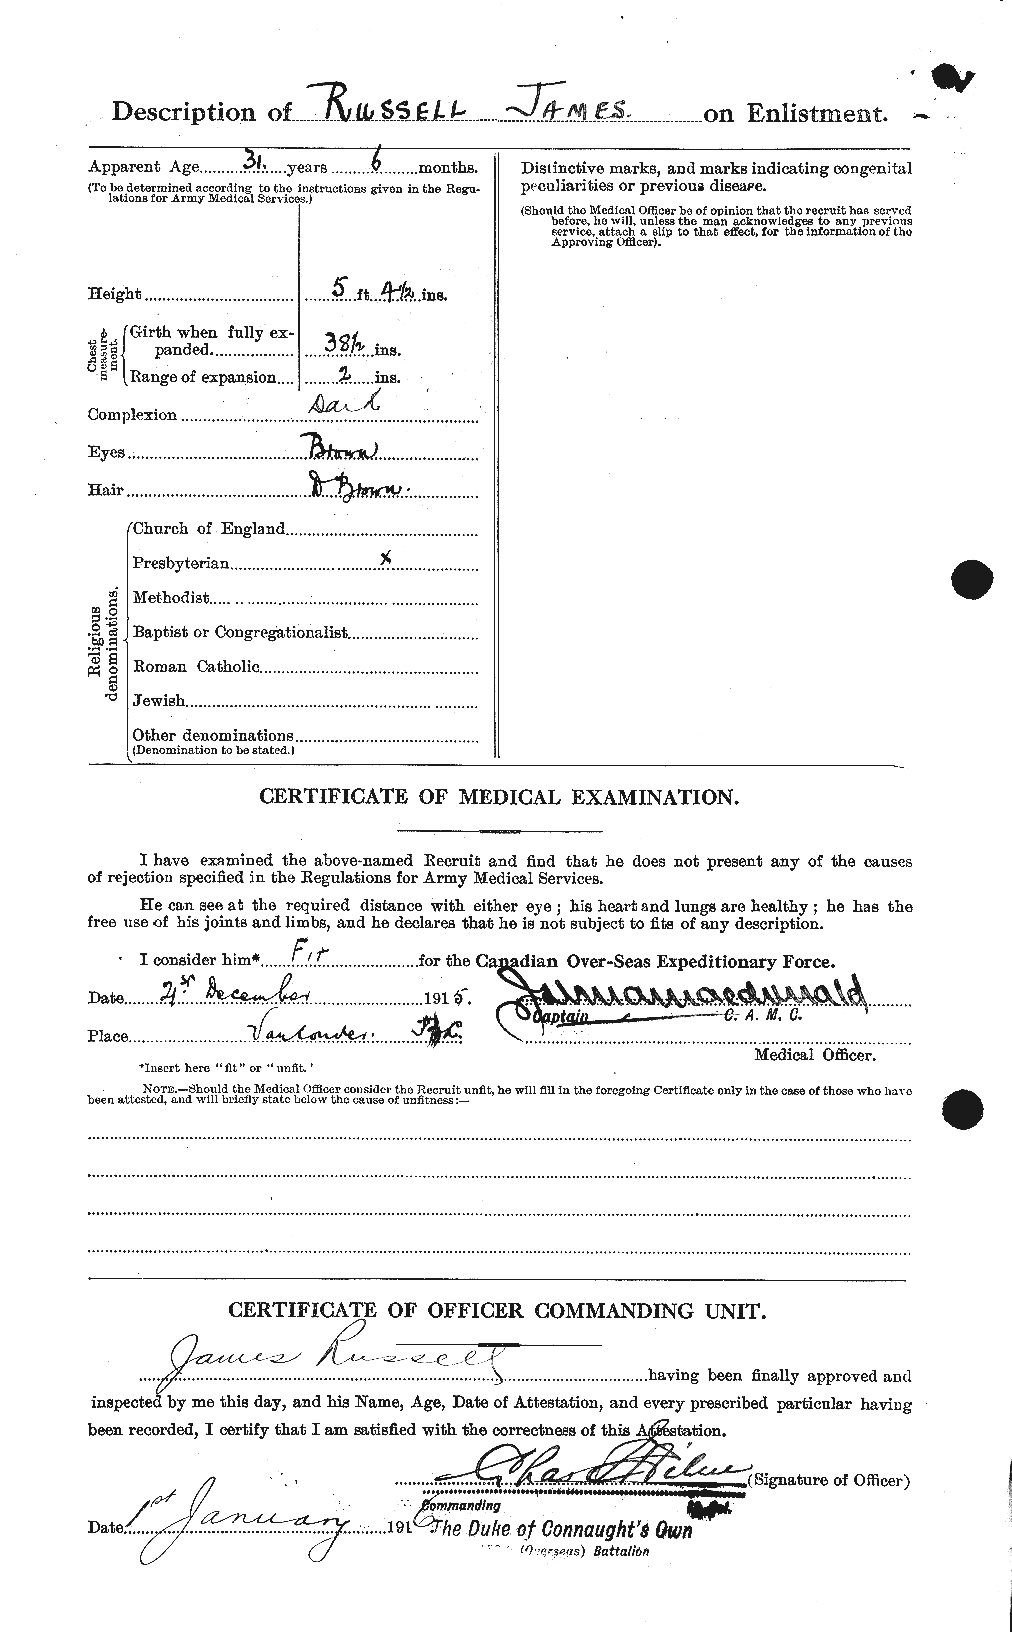 Personnel Records of the First World War - CEF 619045b